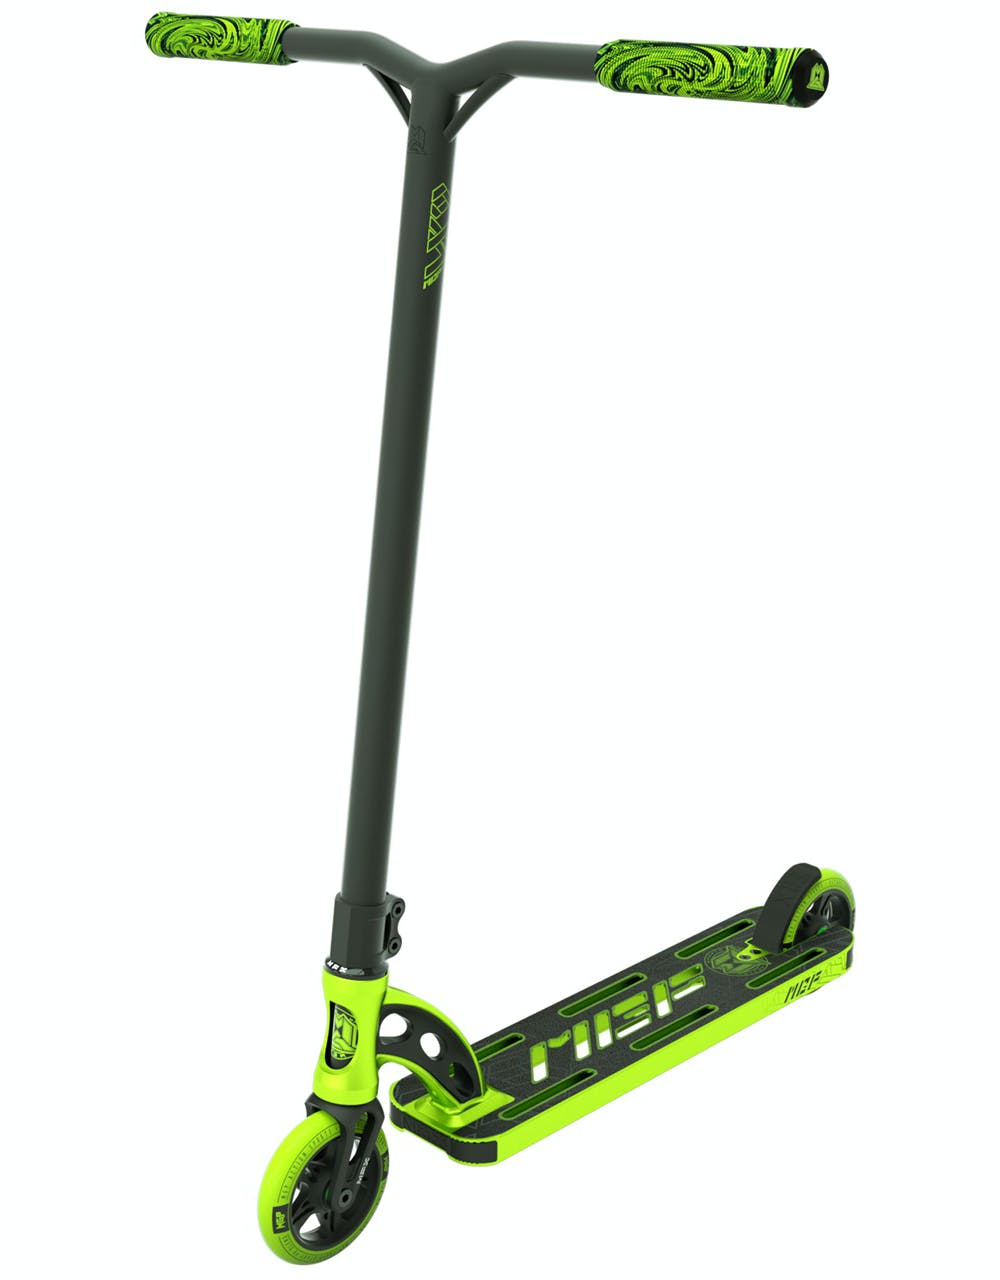 MGP VX 9 Team Edition 4.5" Complete Scooter - Lime